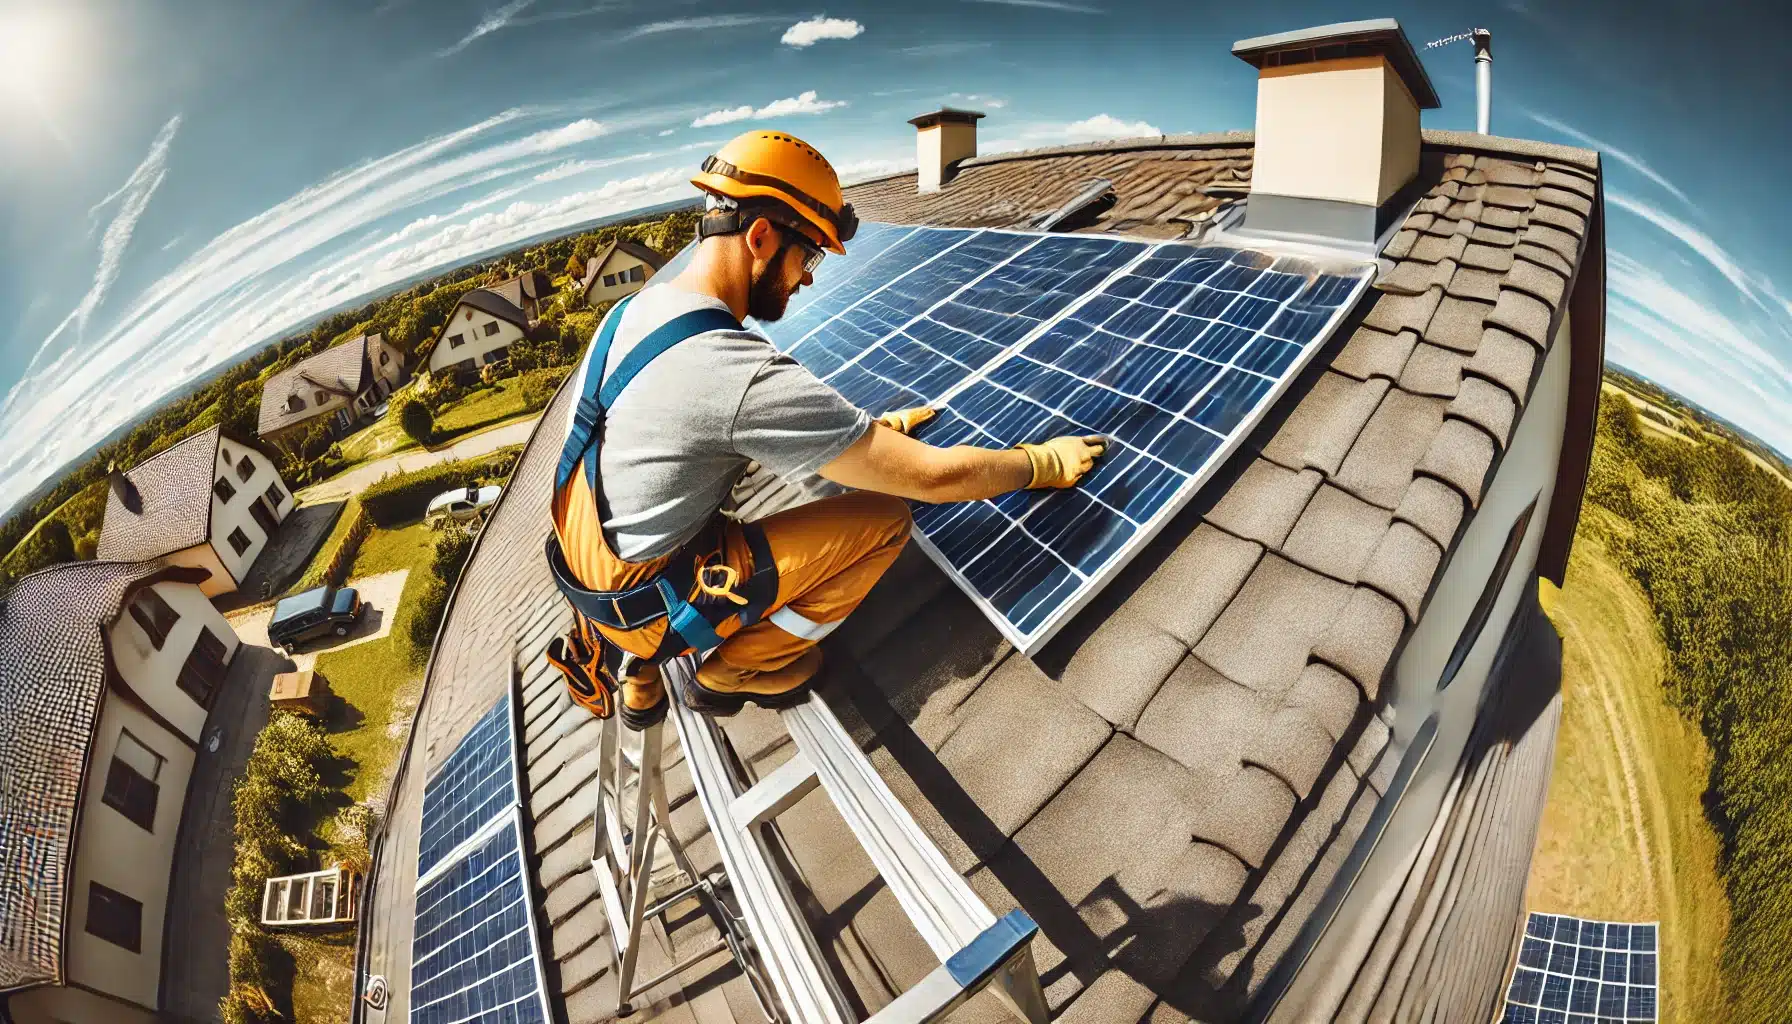 A solar installer installing solar panels on the roof of a house.